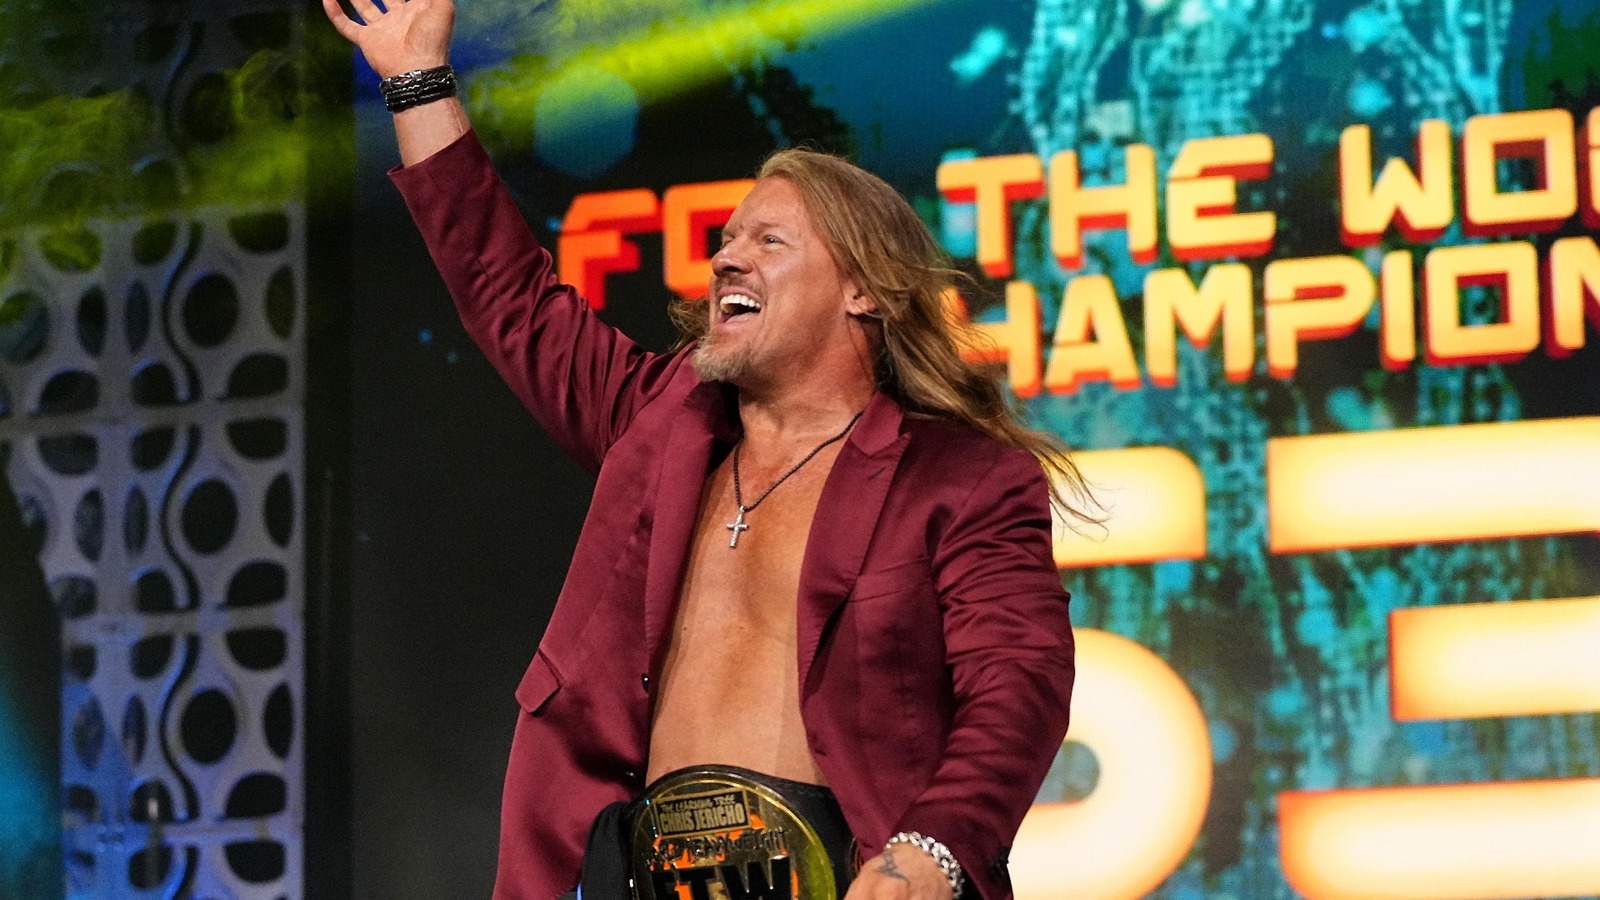 Former AEW commentator Kevin Kelly comments on Chris Jericho’s learning tree gimmick